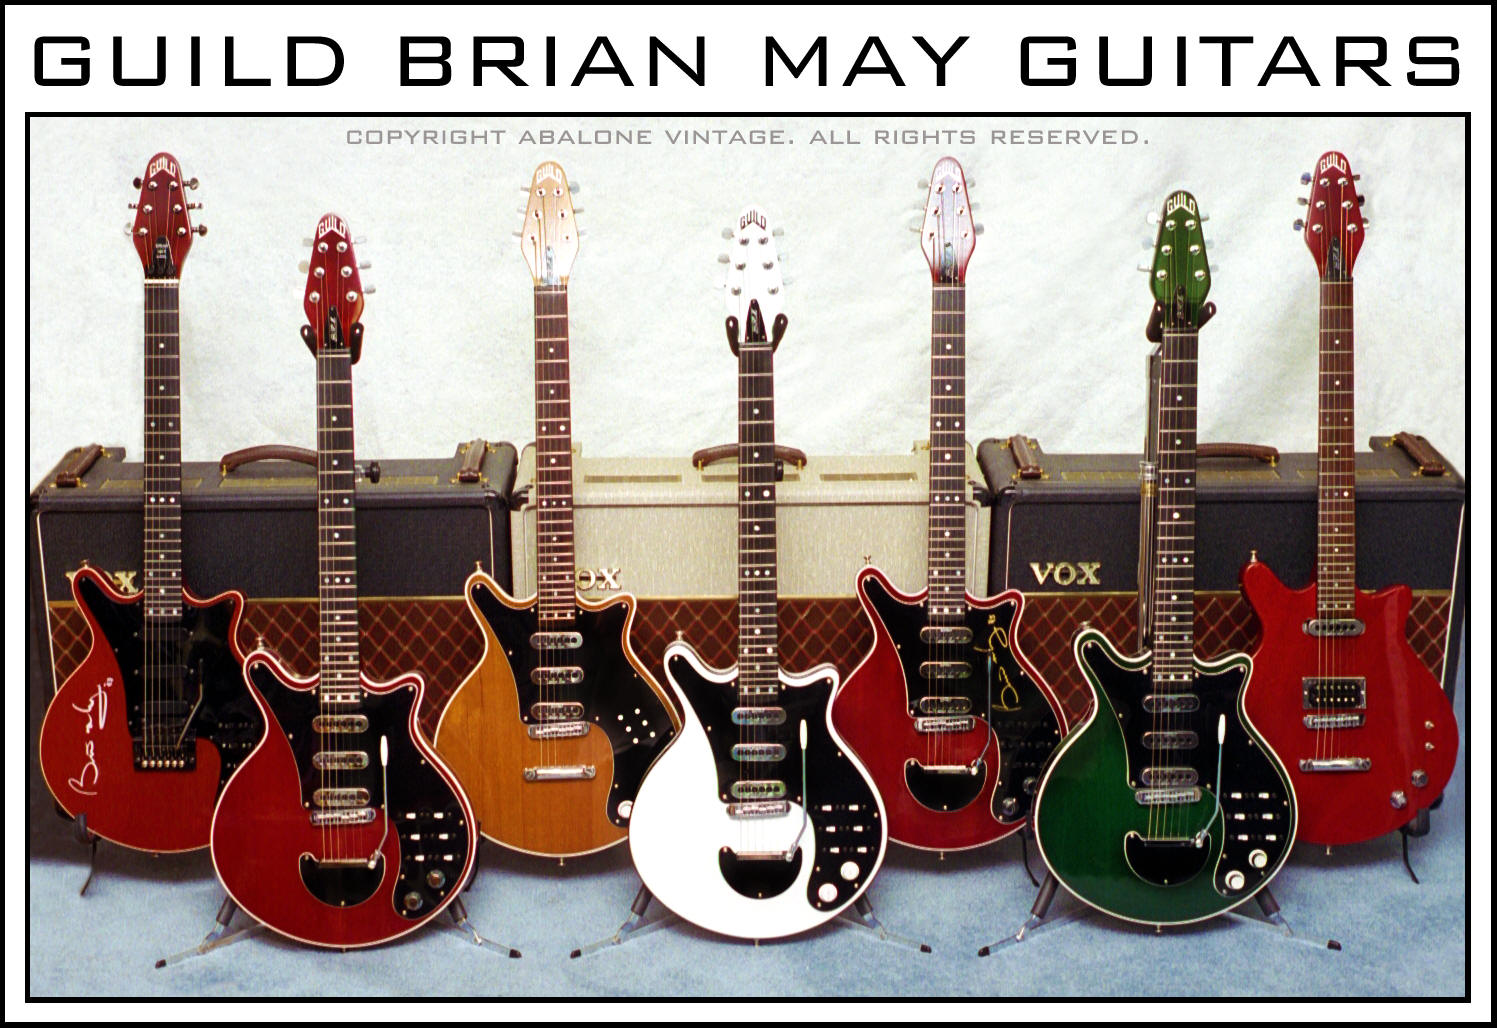 1985 1995 Guild BHM Brian May Signature and red Special model guitars guitarist Queen guitar